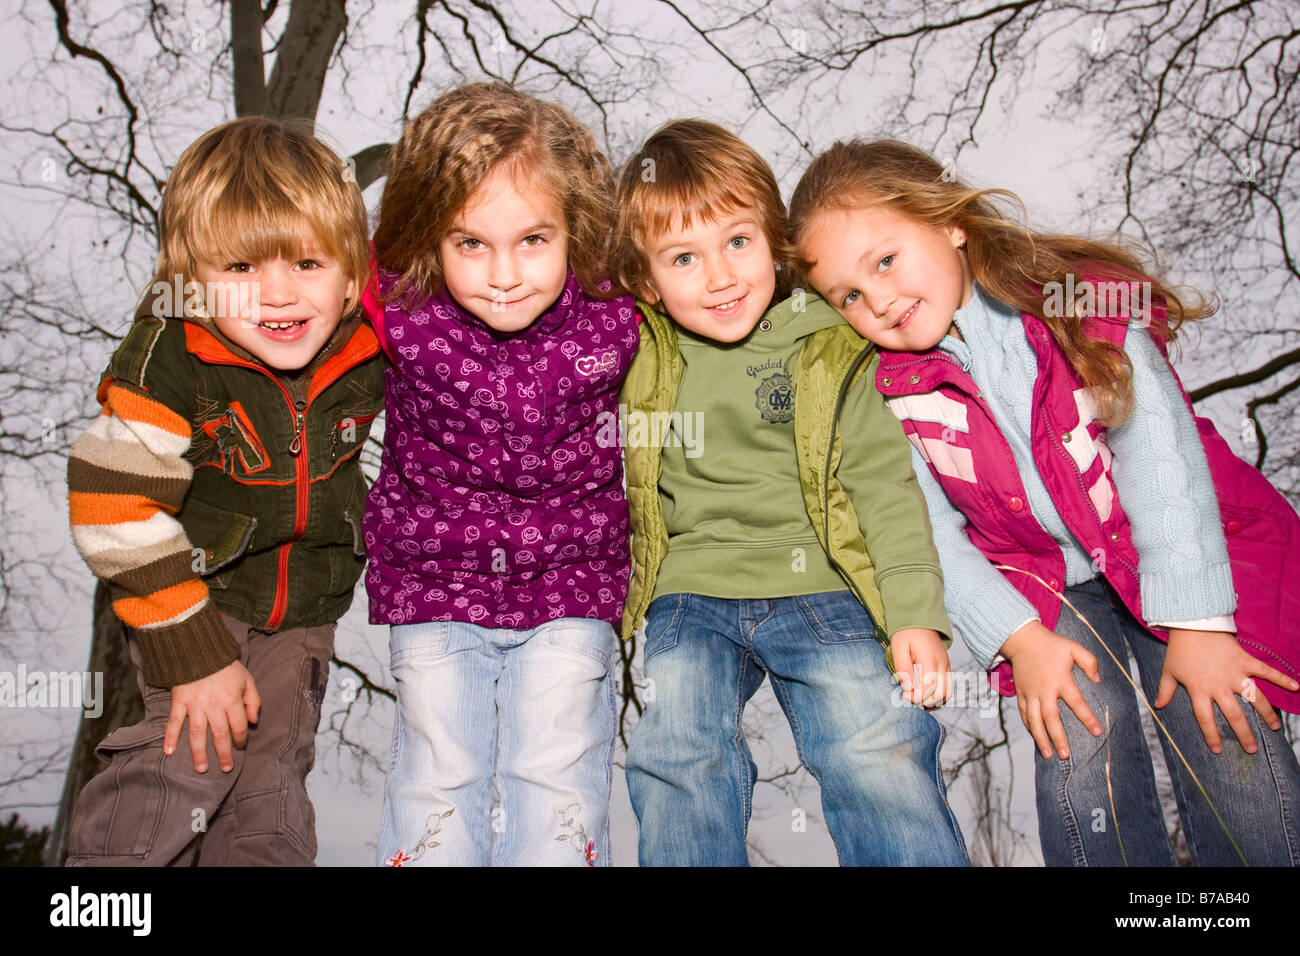 A group of young children of ages 4, 4, 3 and 4, outdoors Stock Photo